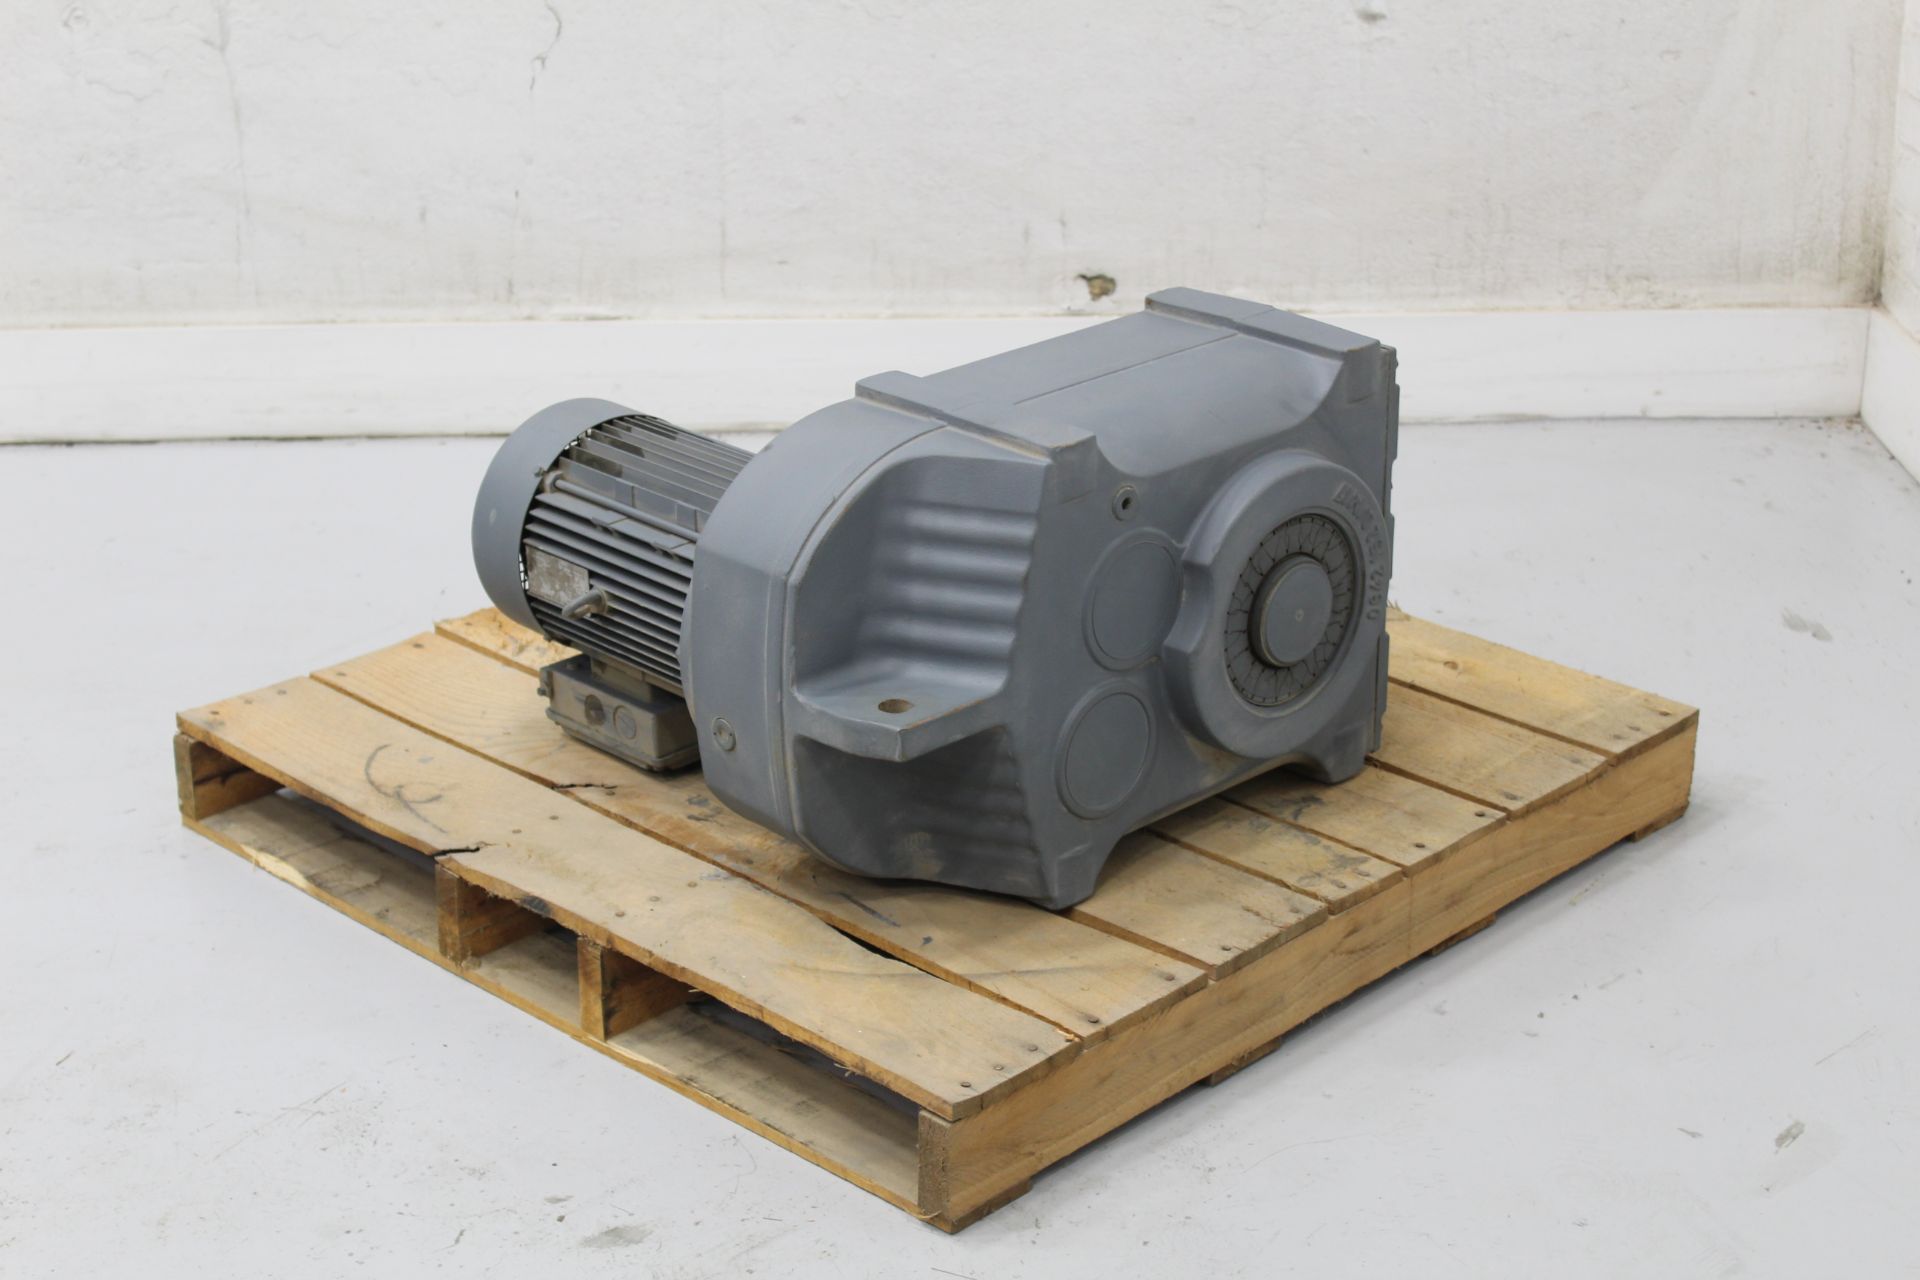 SEW EURODRIVE A/C MOTOR WITH GEAR DRIVE, MODEL FA97 DV132S4, 7 HP (5.5 KW), 1720 RPM/18 RPM, 277/480 - Image 2 of 4